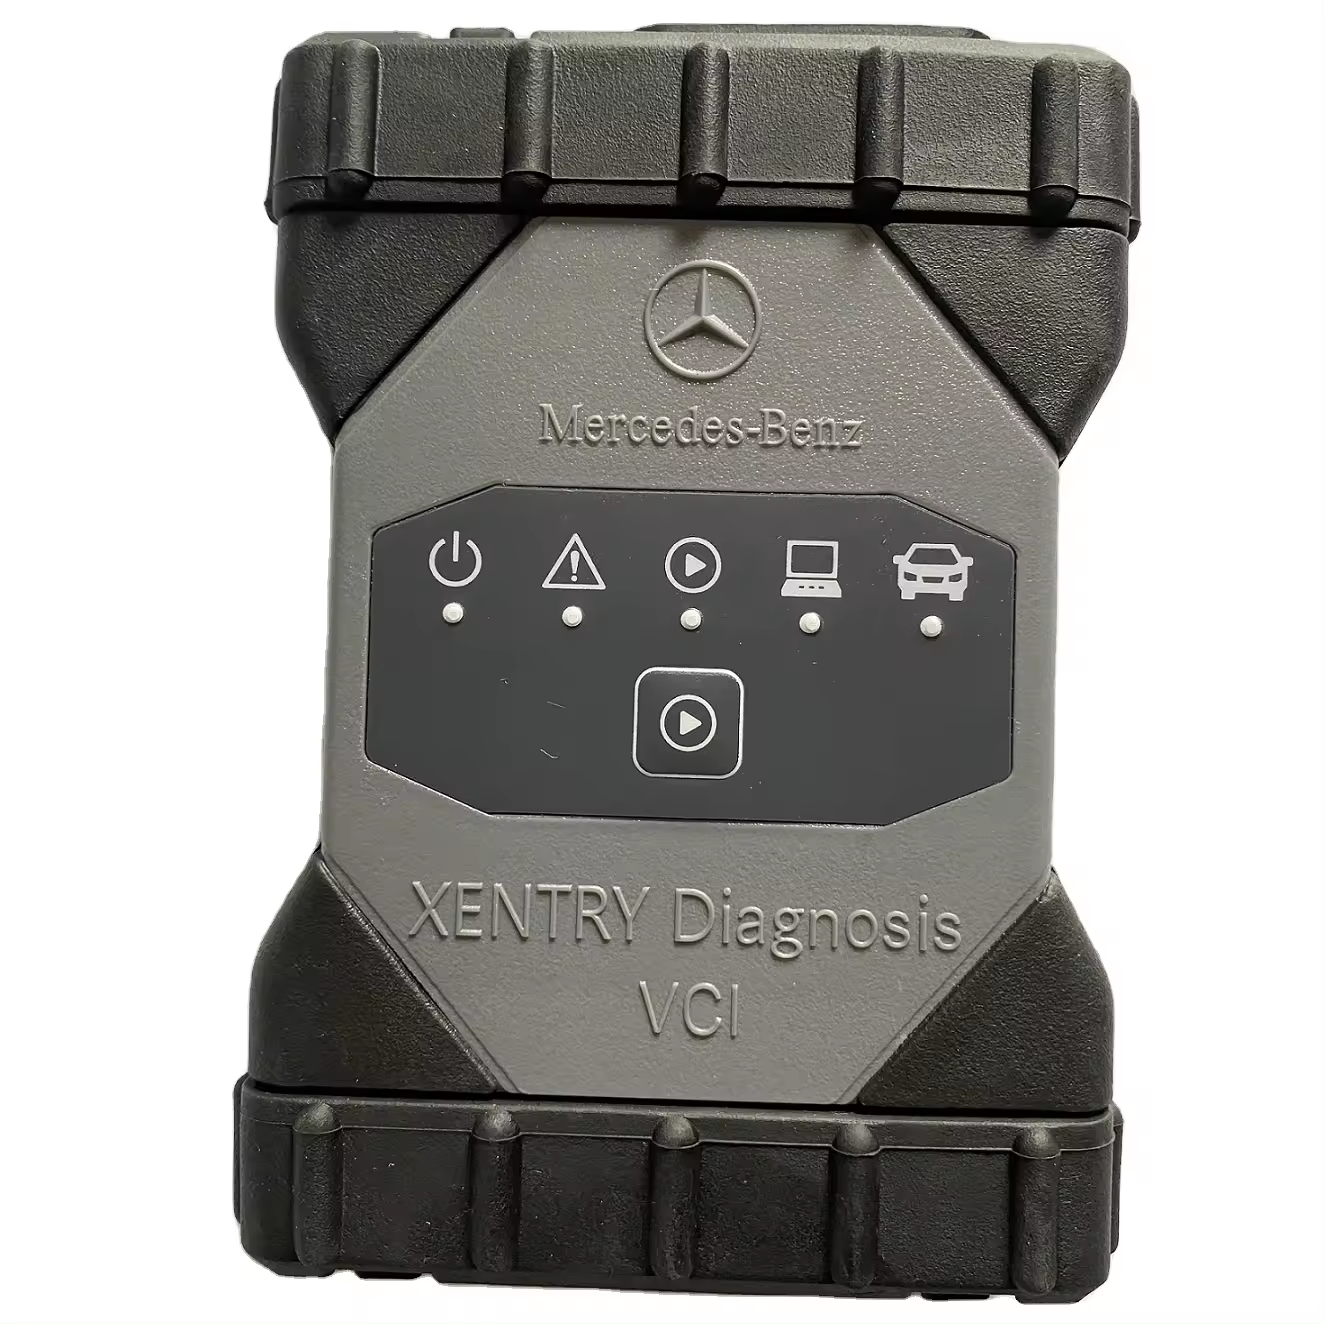 Mercedes Benz MB SD Connect C6 DoIP Xentry VCI WiFi Multiplexer Truck Car Diagnosis Tool V2024.06